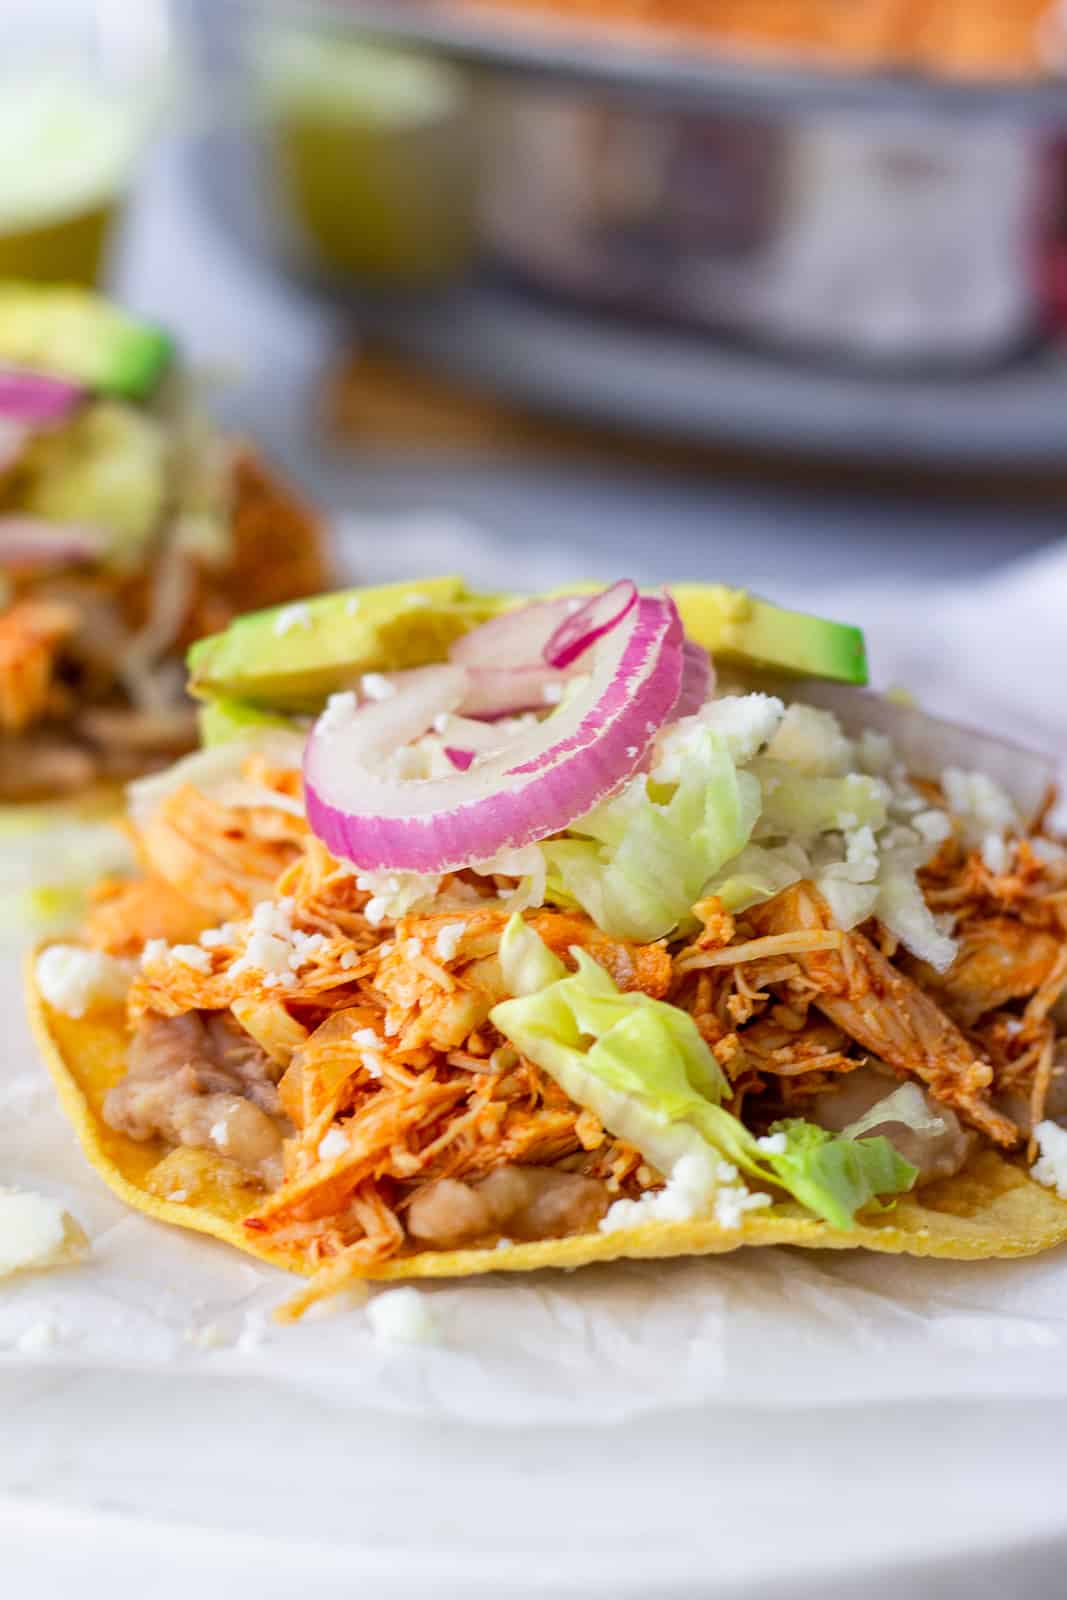 Up close view of completed Chicken Tinga Tostadas